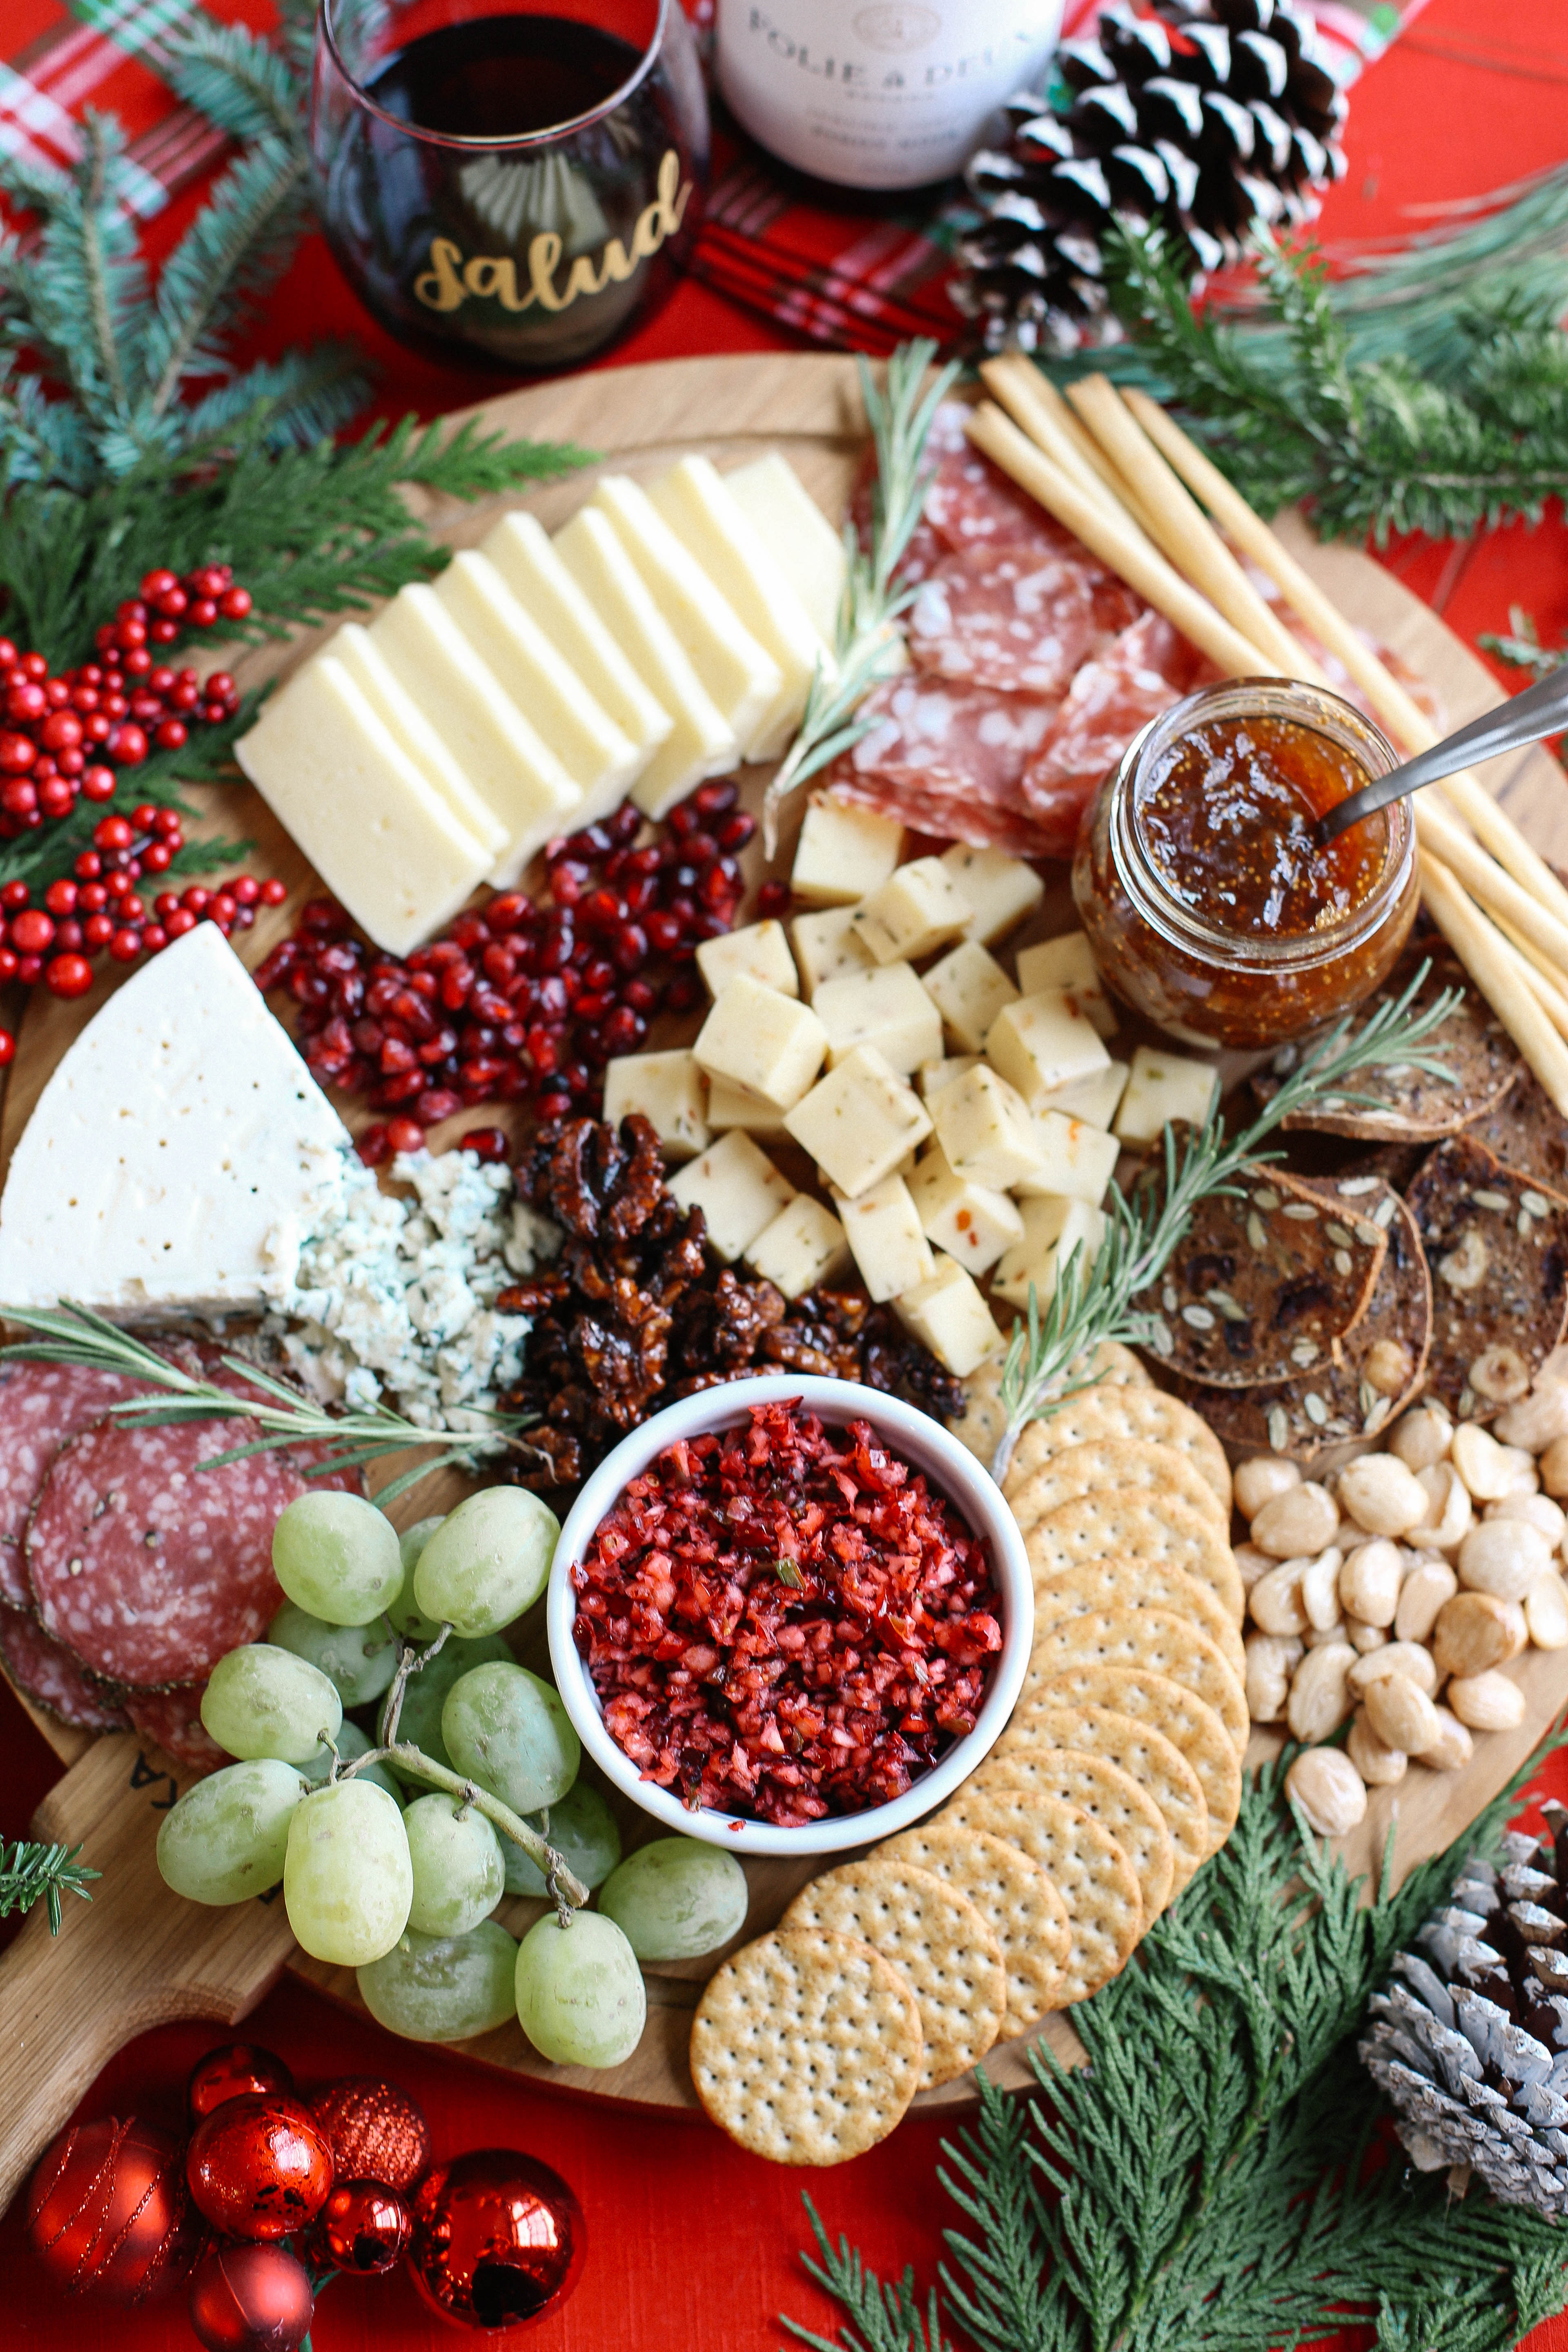 Learn how to create the perfect holiday cheese board in just five simple steps with an assortment of cheeses, meats, fruits, nuts, and a variety of spreads!